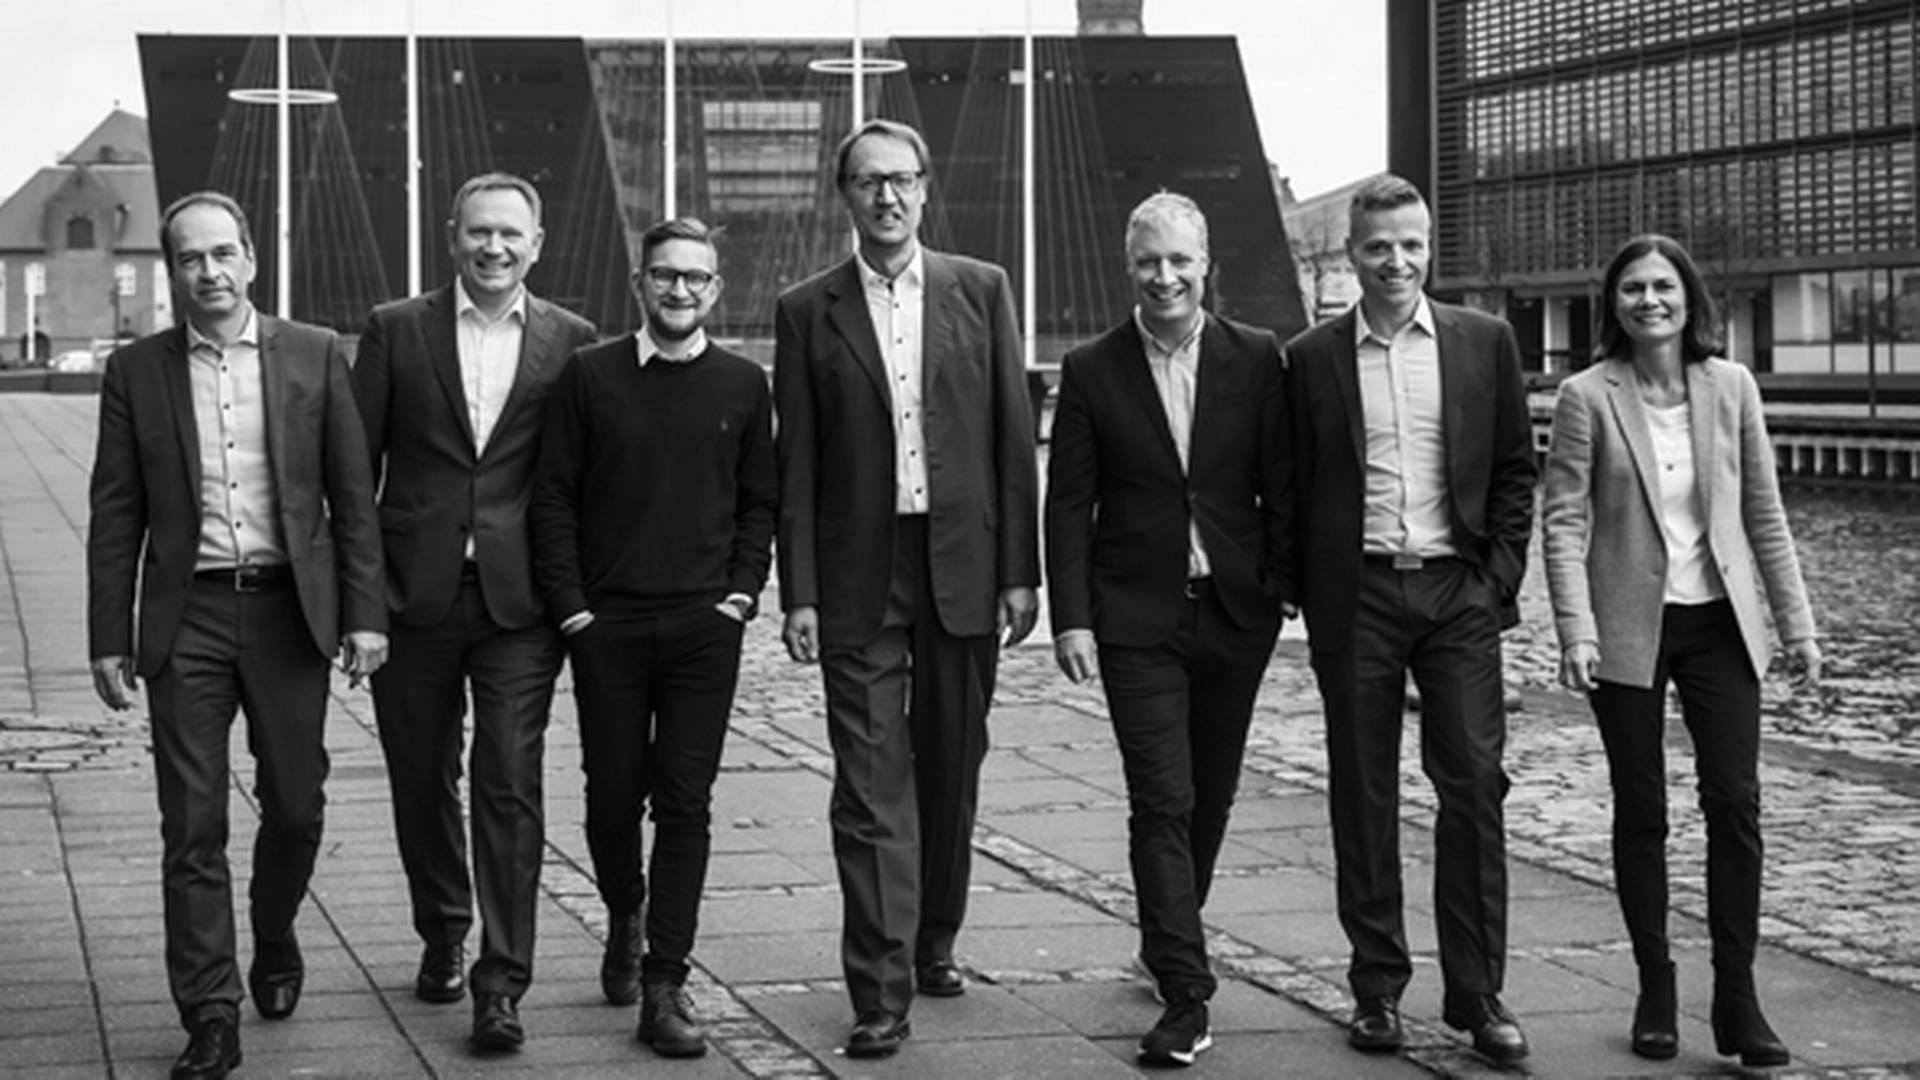 From left to right: Michael Albrechtslund, Ketil Petersen, David Harboe, Per Chrom-Jacobsen, Anders Hartmann, Claus Møldrup and Lotte Fløe Marshall. | Photo: Nord.Investments